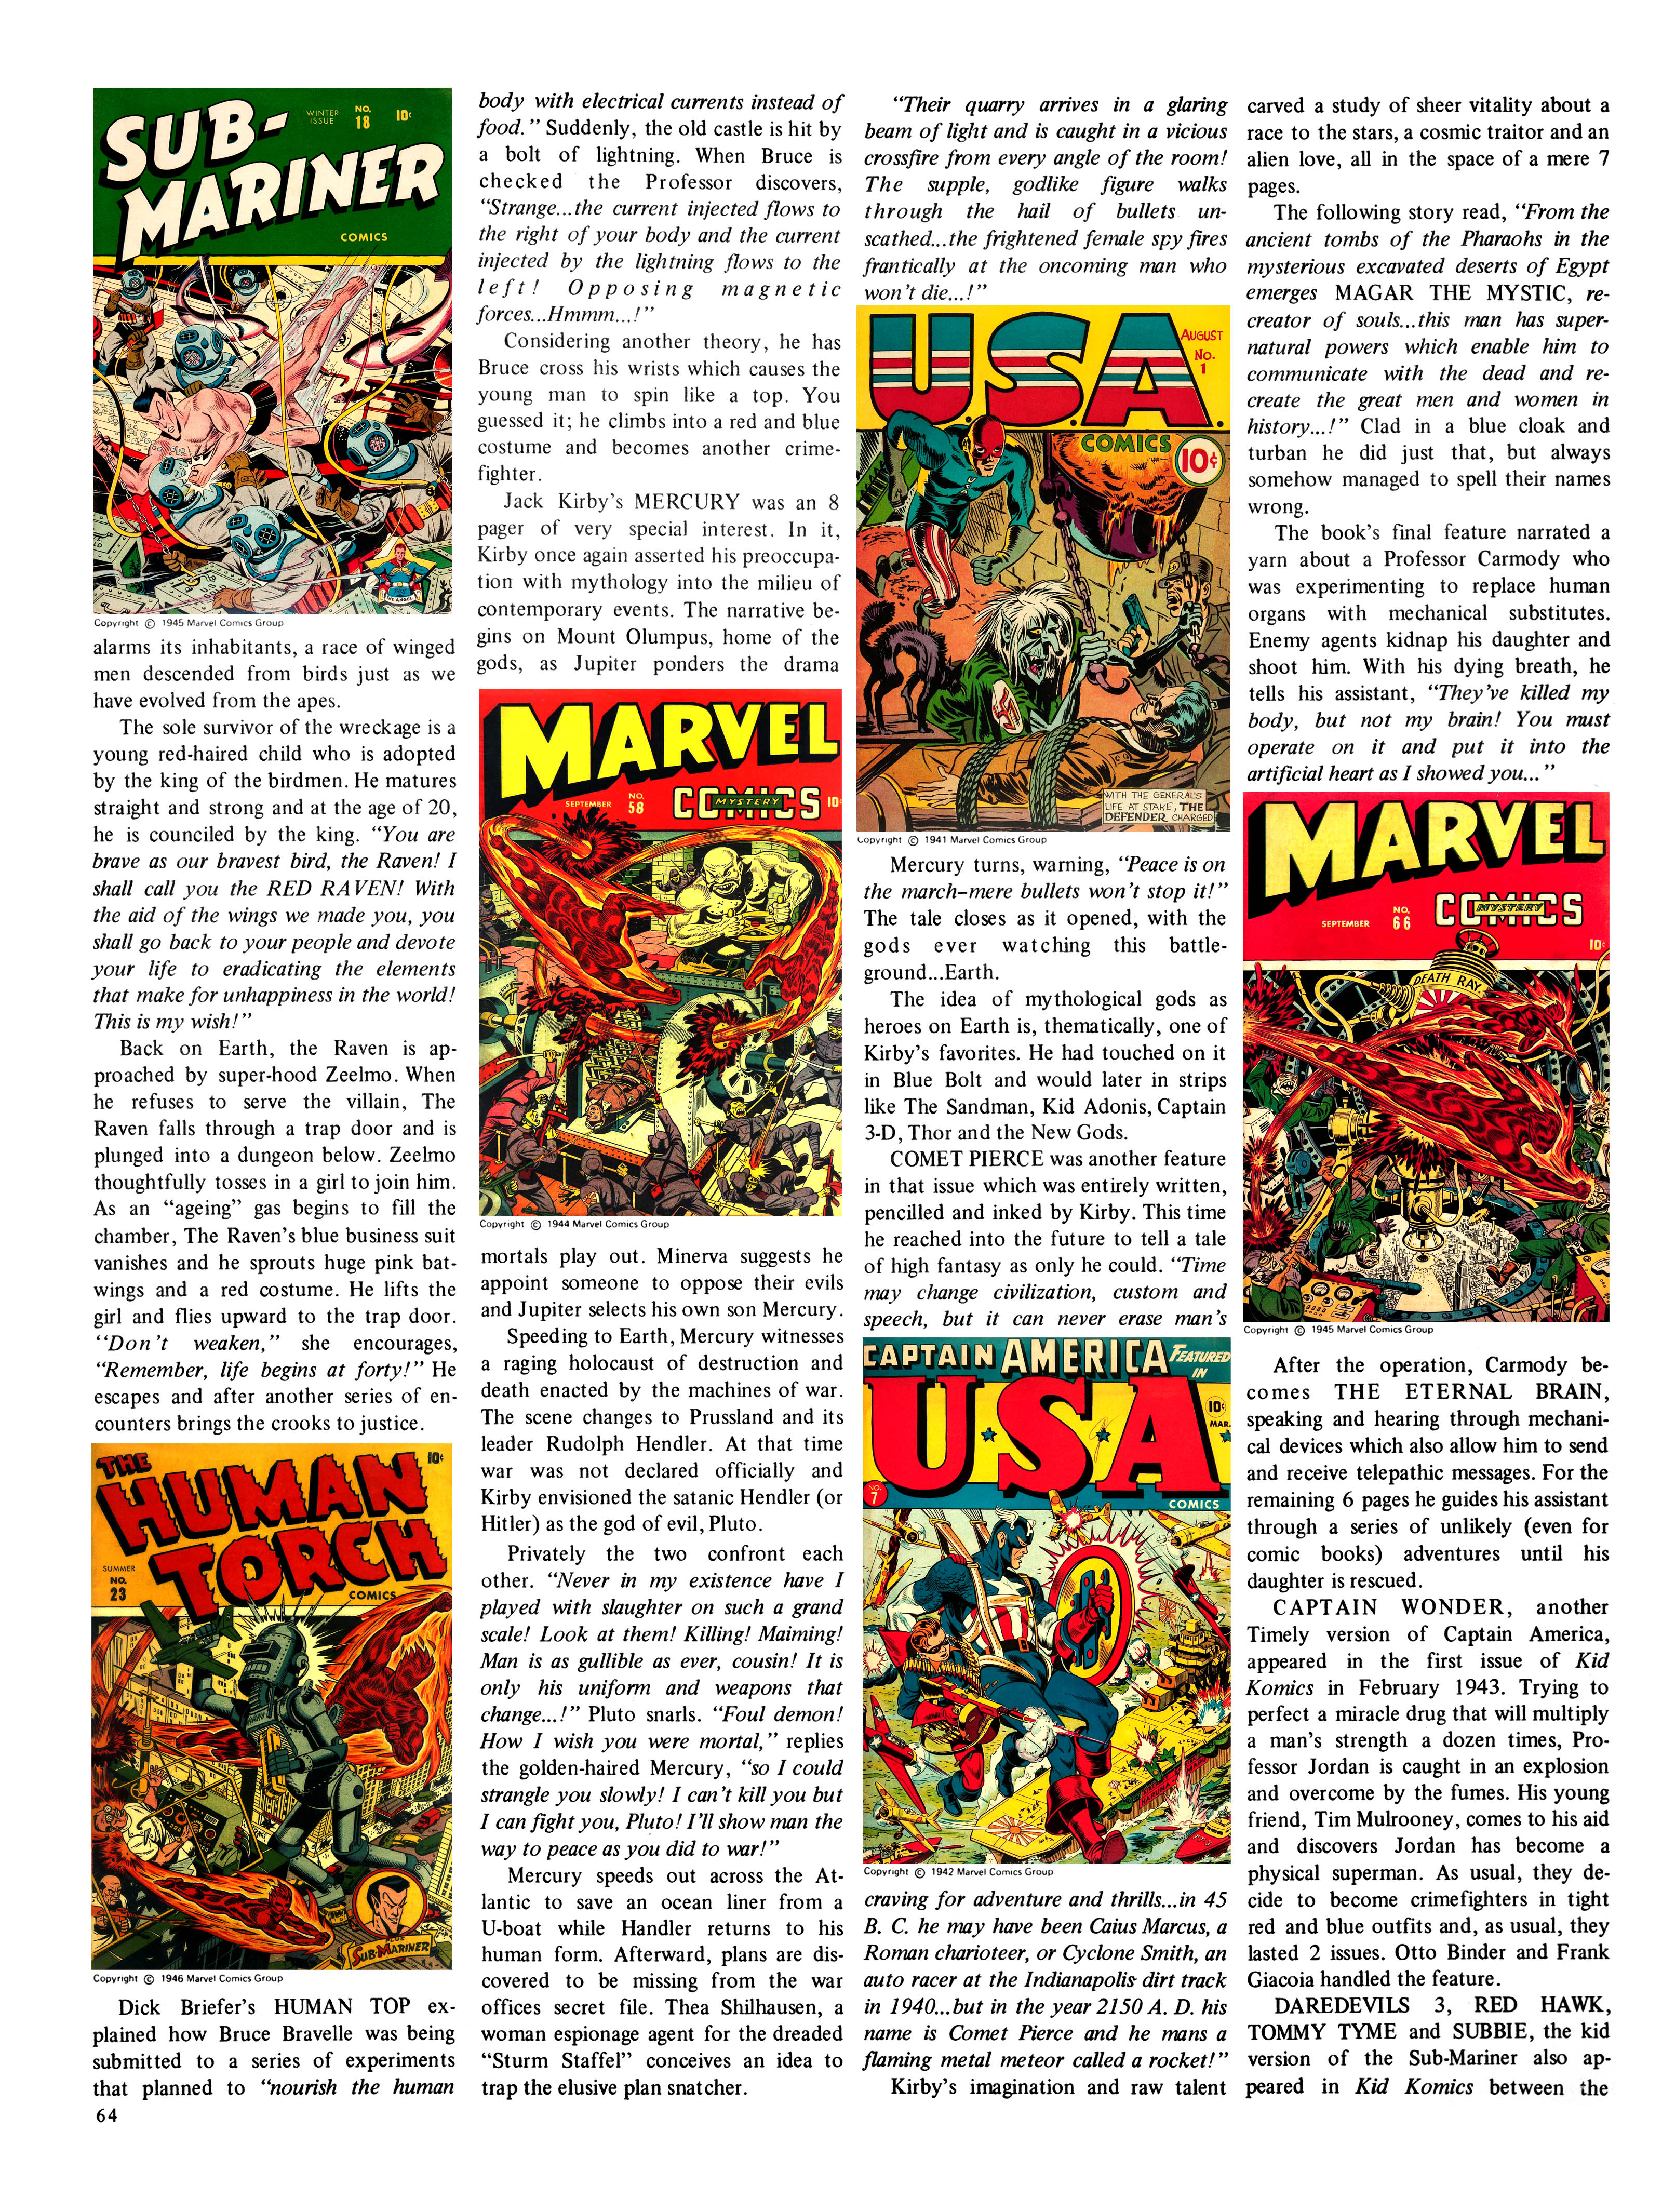 Read online The Steranko History of Comics comic -  Issue # TPB 1 - 64